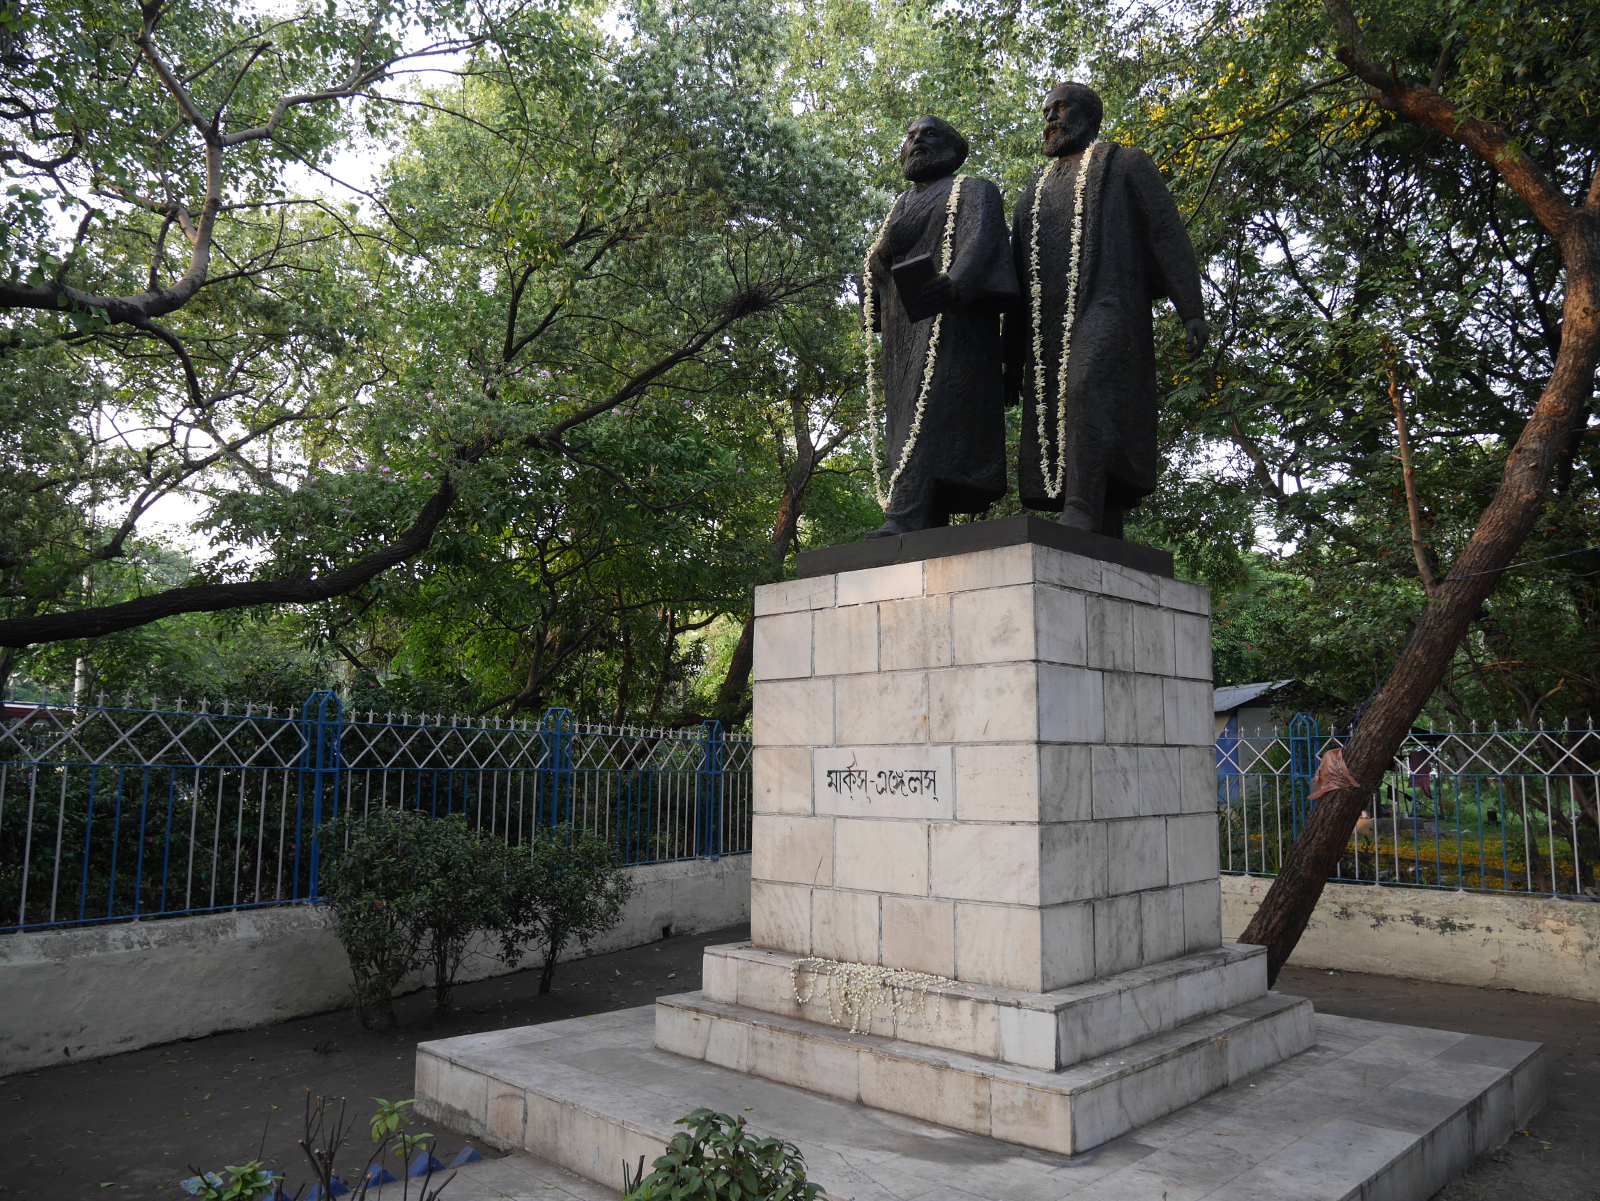 Statues of Marx and Engels freshly garlanded for May Day.